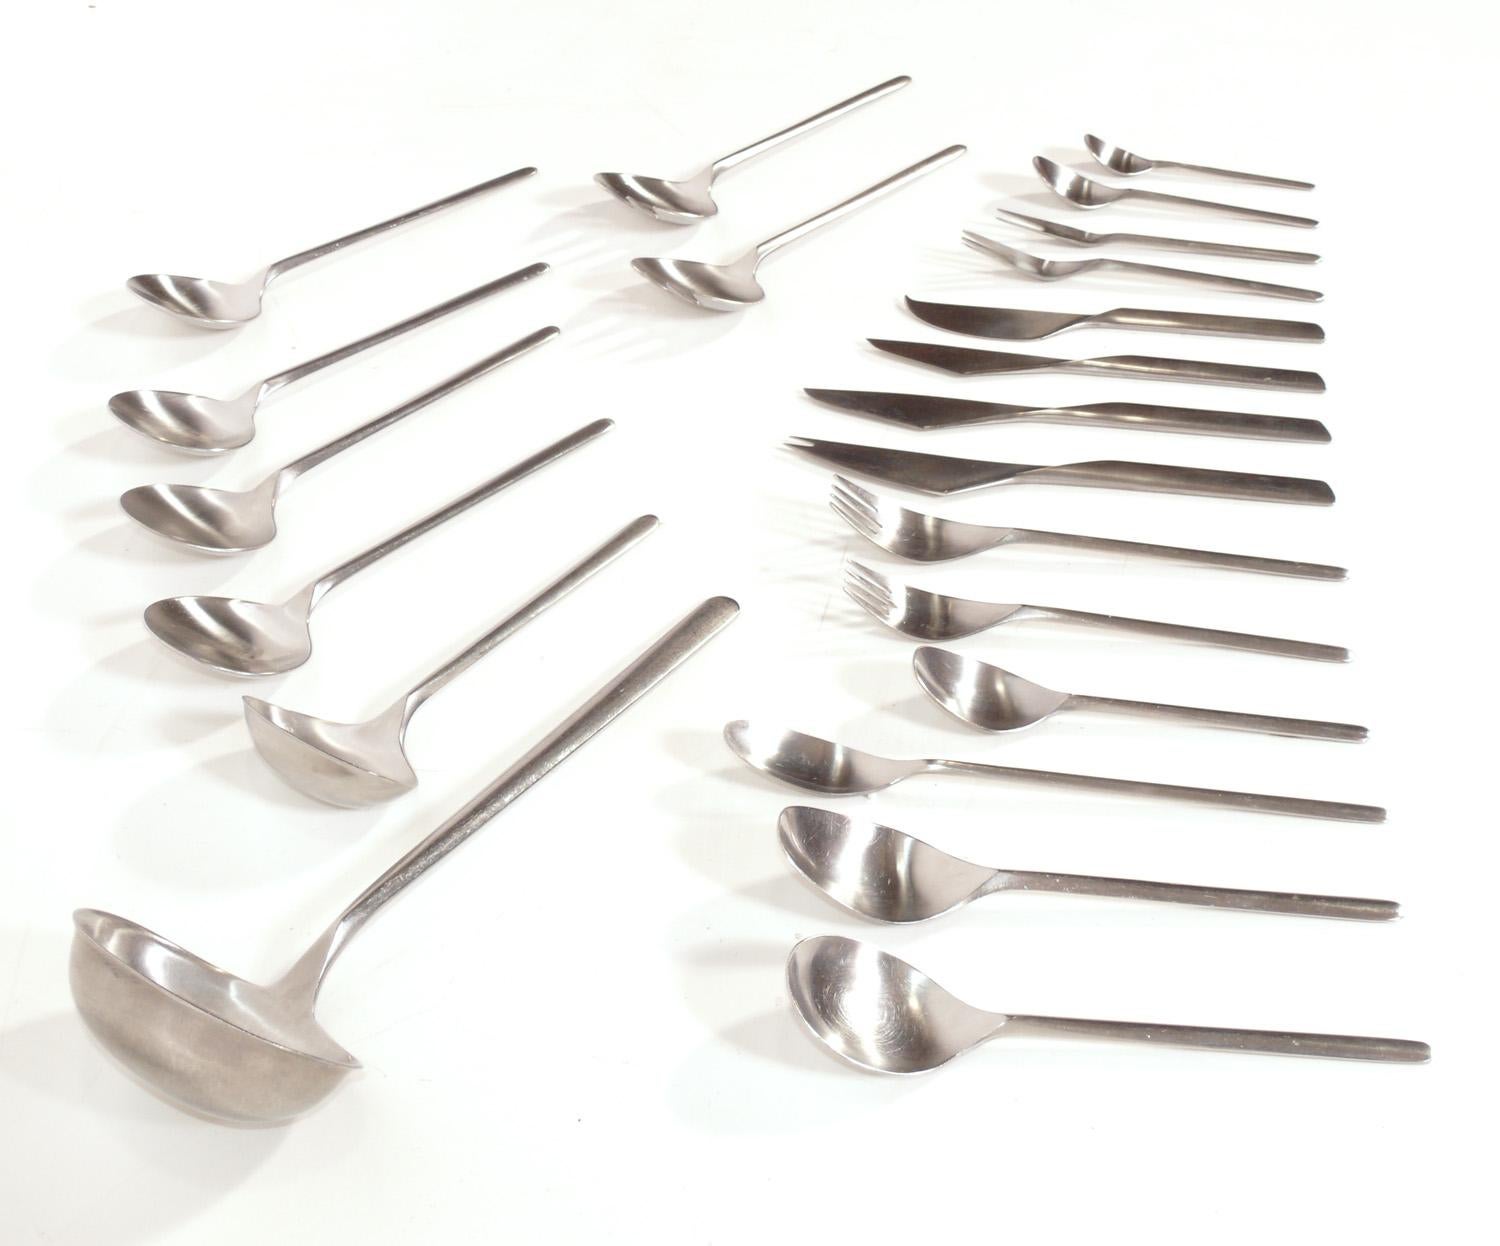 Modernist stainless steel flatware set, designed by Tapio Wirkkala for Rosenthal, Austria, circa 1963. This is a large set containing 92 pieces total. They are constructed of dishwasher safe stainless steel, making them a great choice for a 